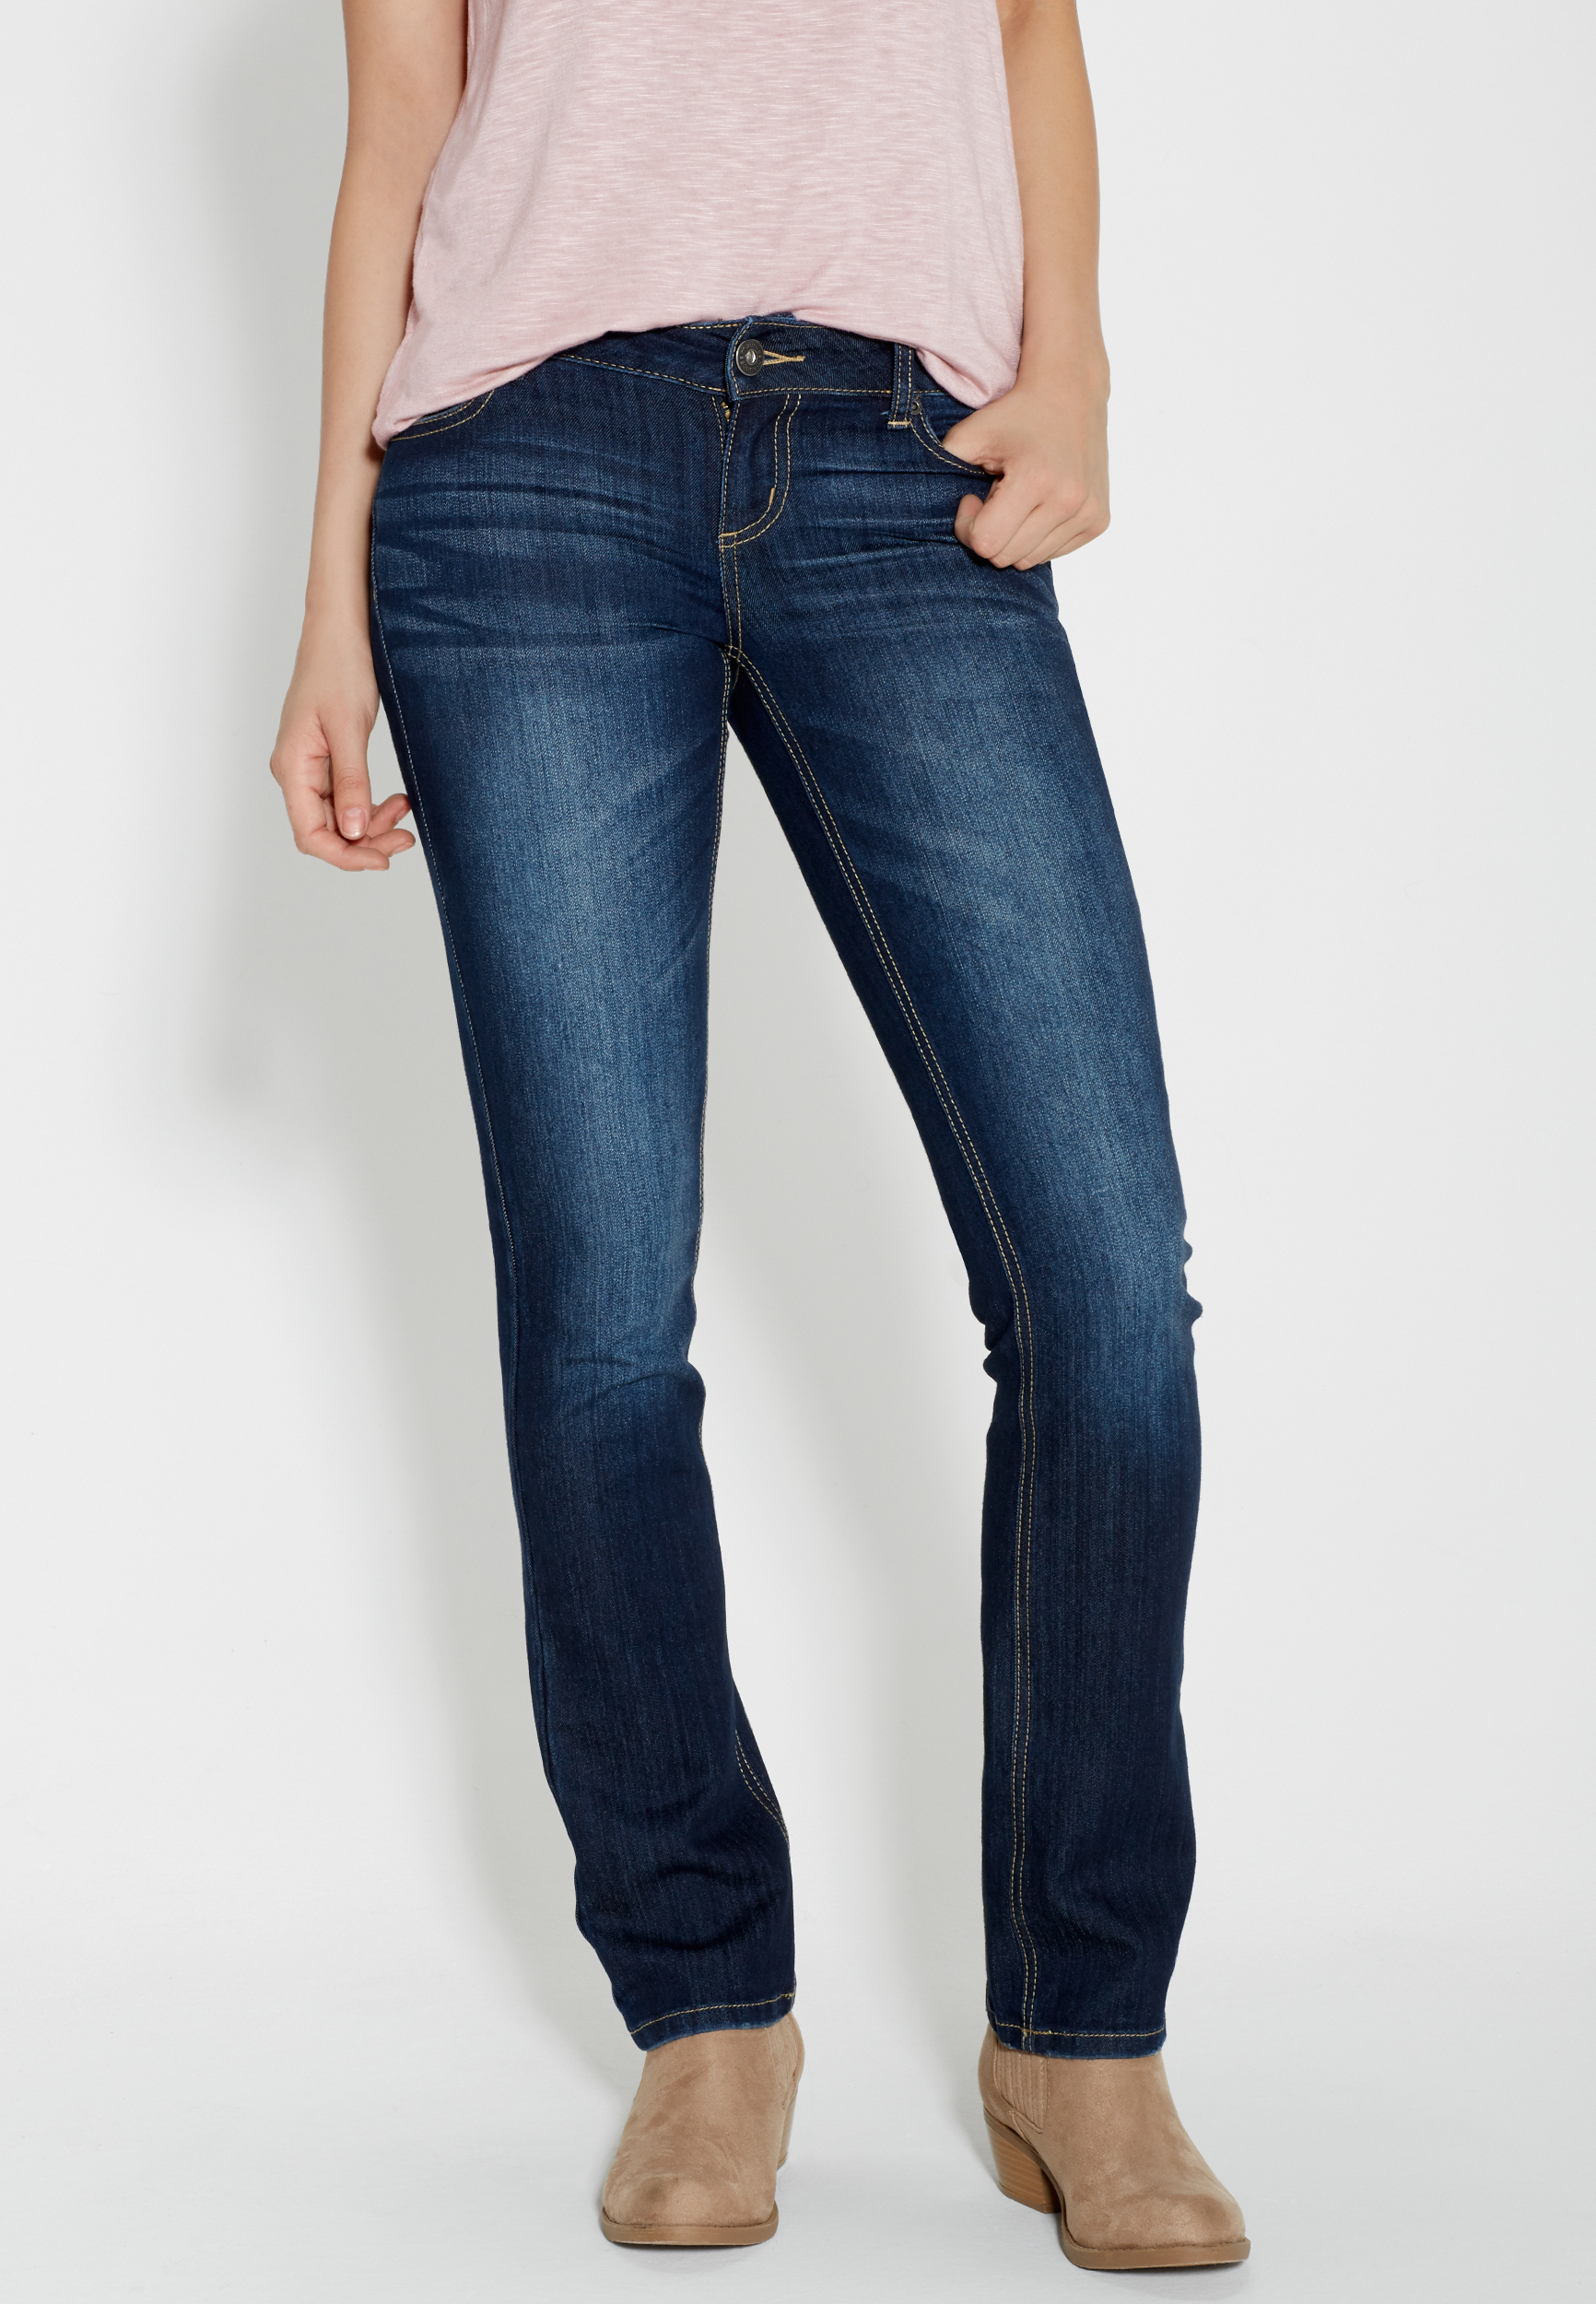 Jeans for Women | Denim | maurices